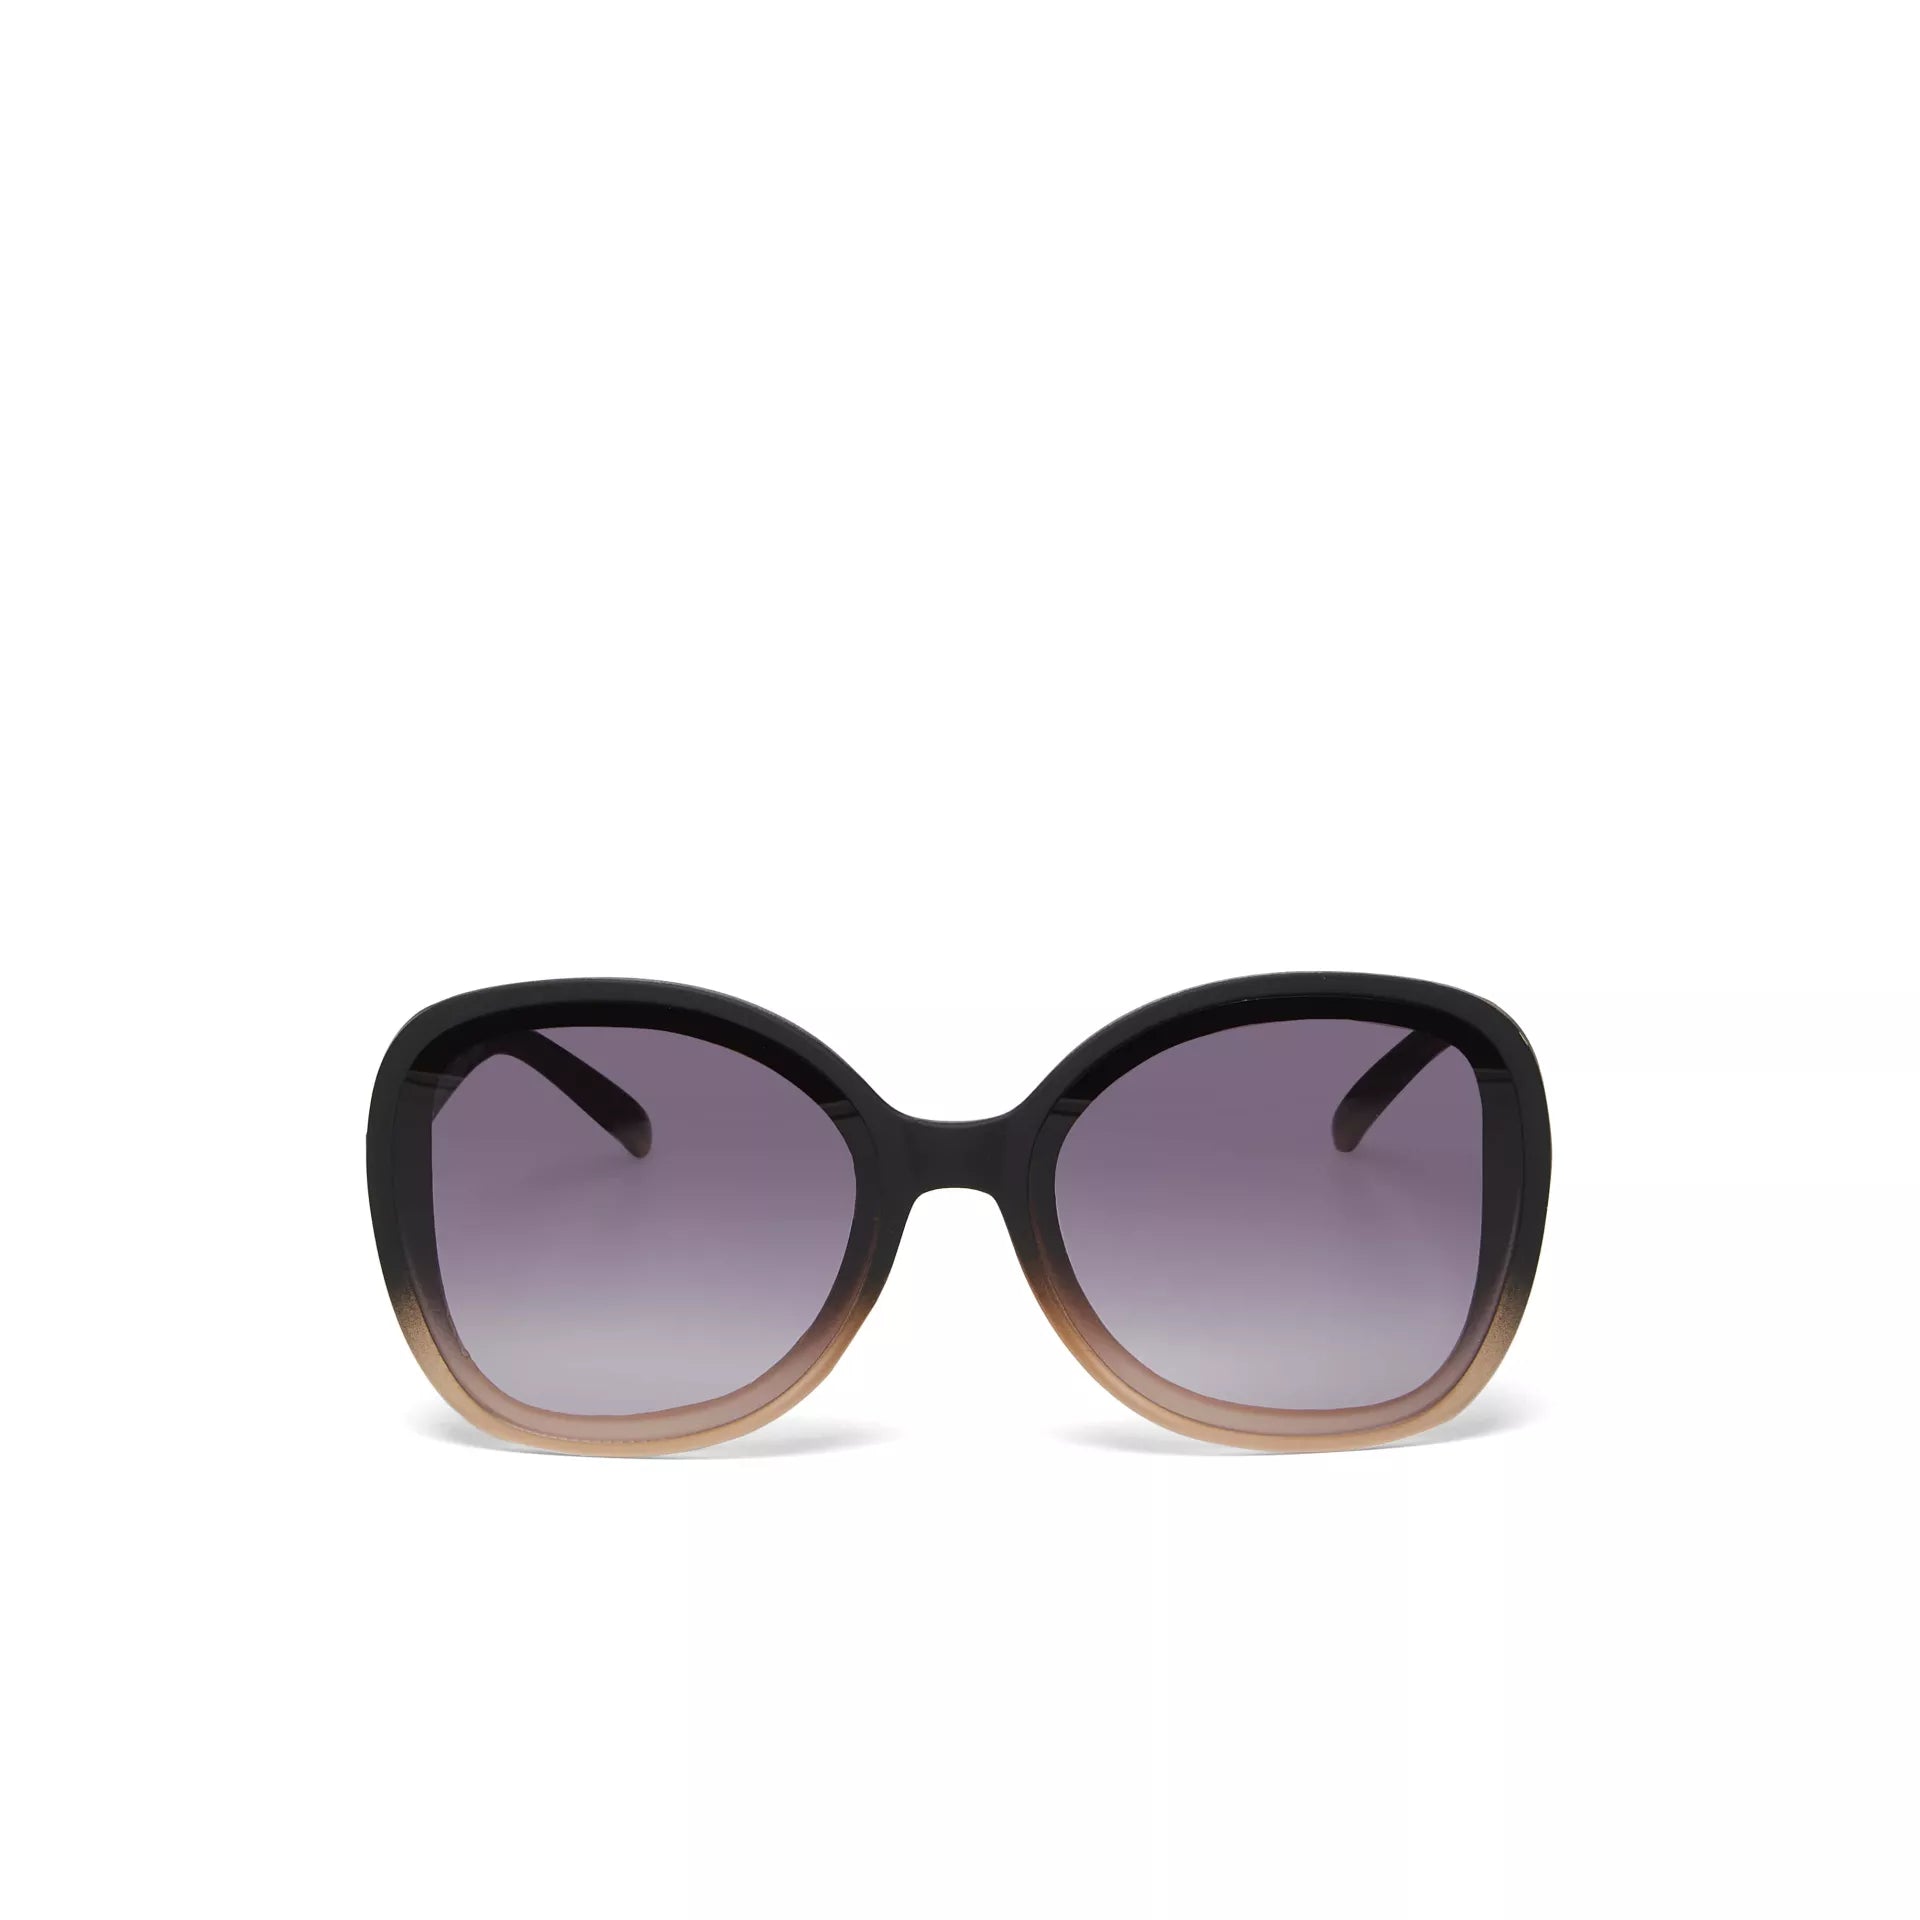 Fabulous Gifts Okkia Sunglasses Butterfly Black Pink by Weirs of Baggot Street